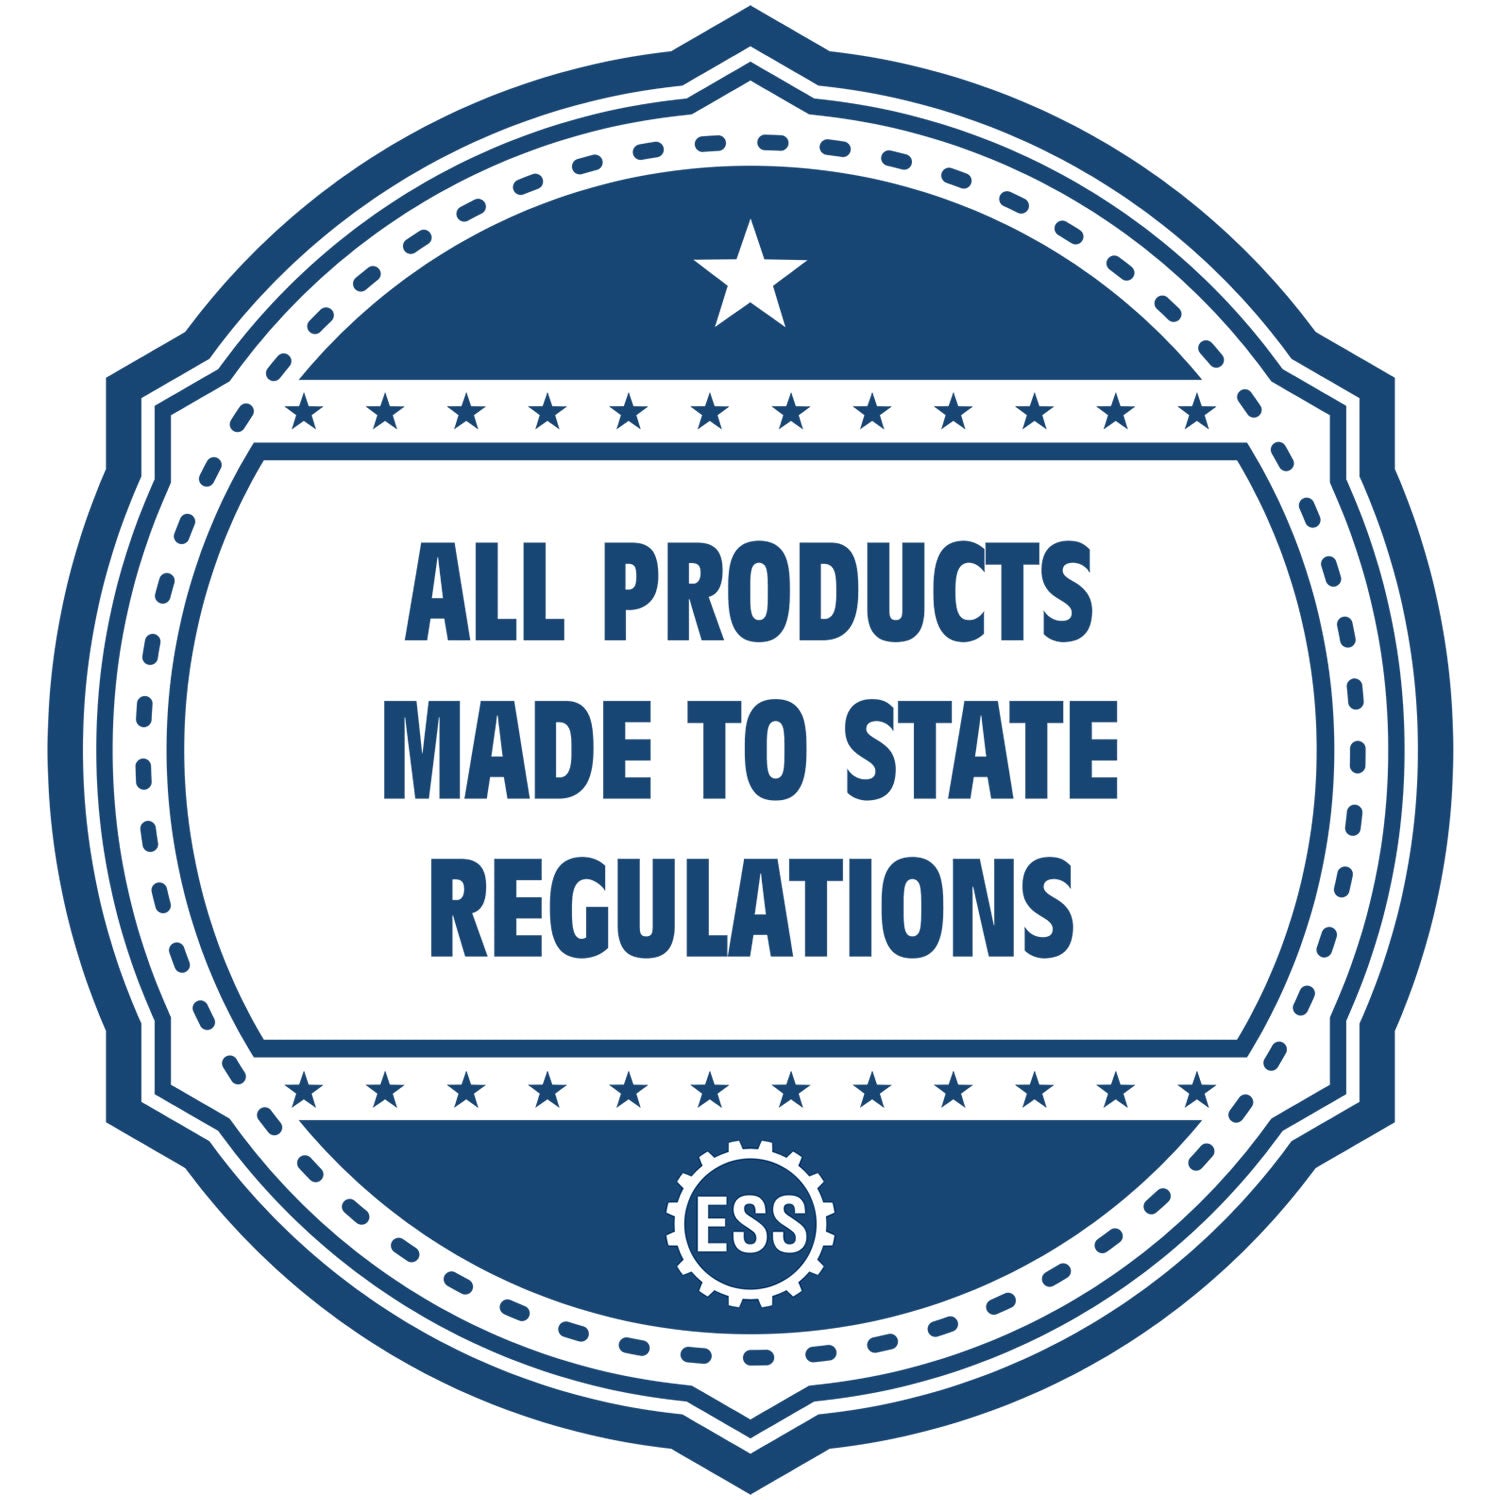 An icon or badge element for the Handheld Arkansas Architect Seal Embosser showing that this product is made in compliance with state regulations.